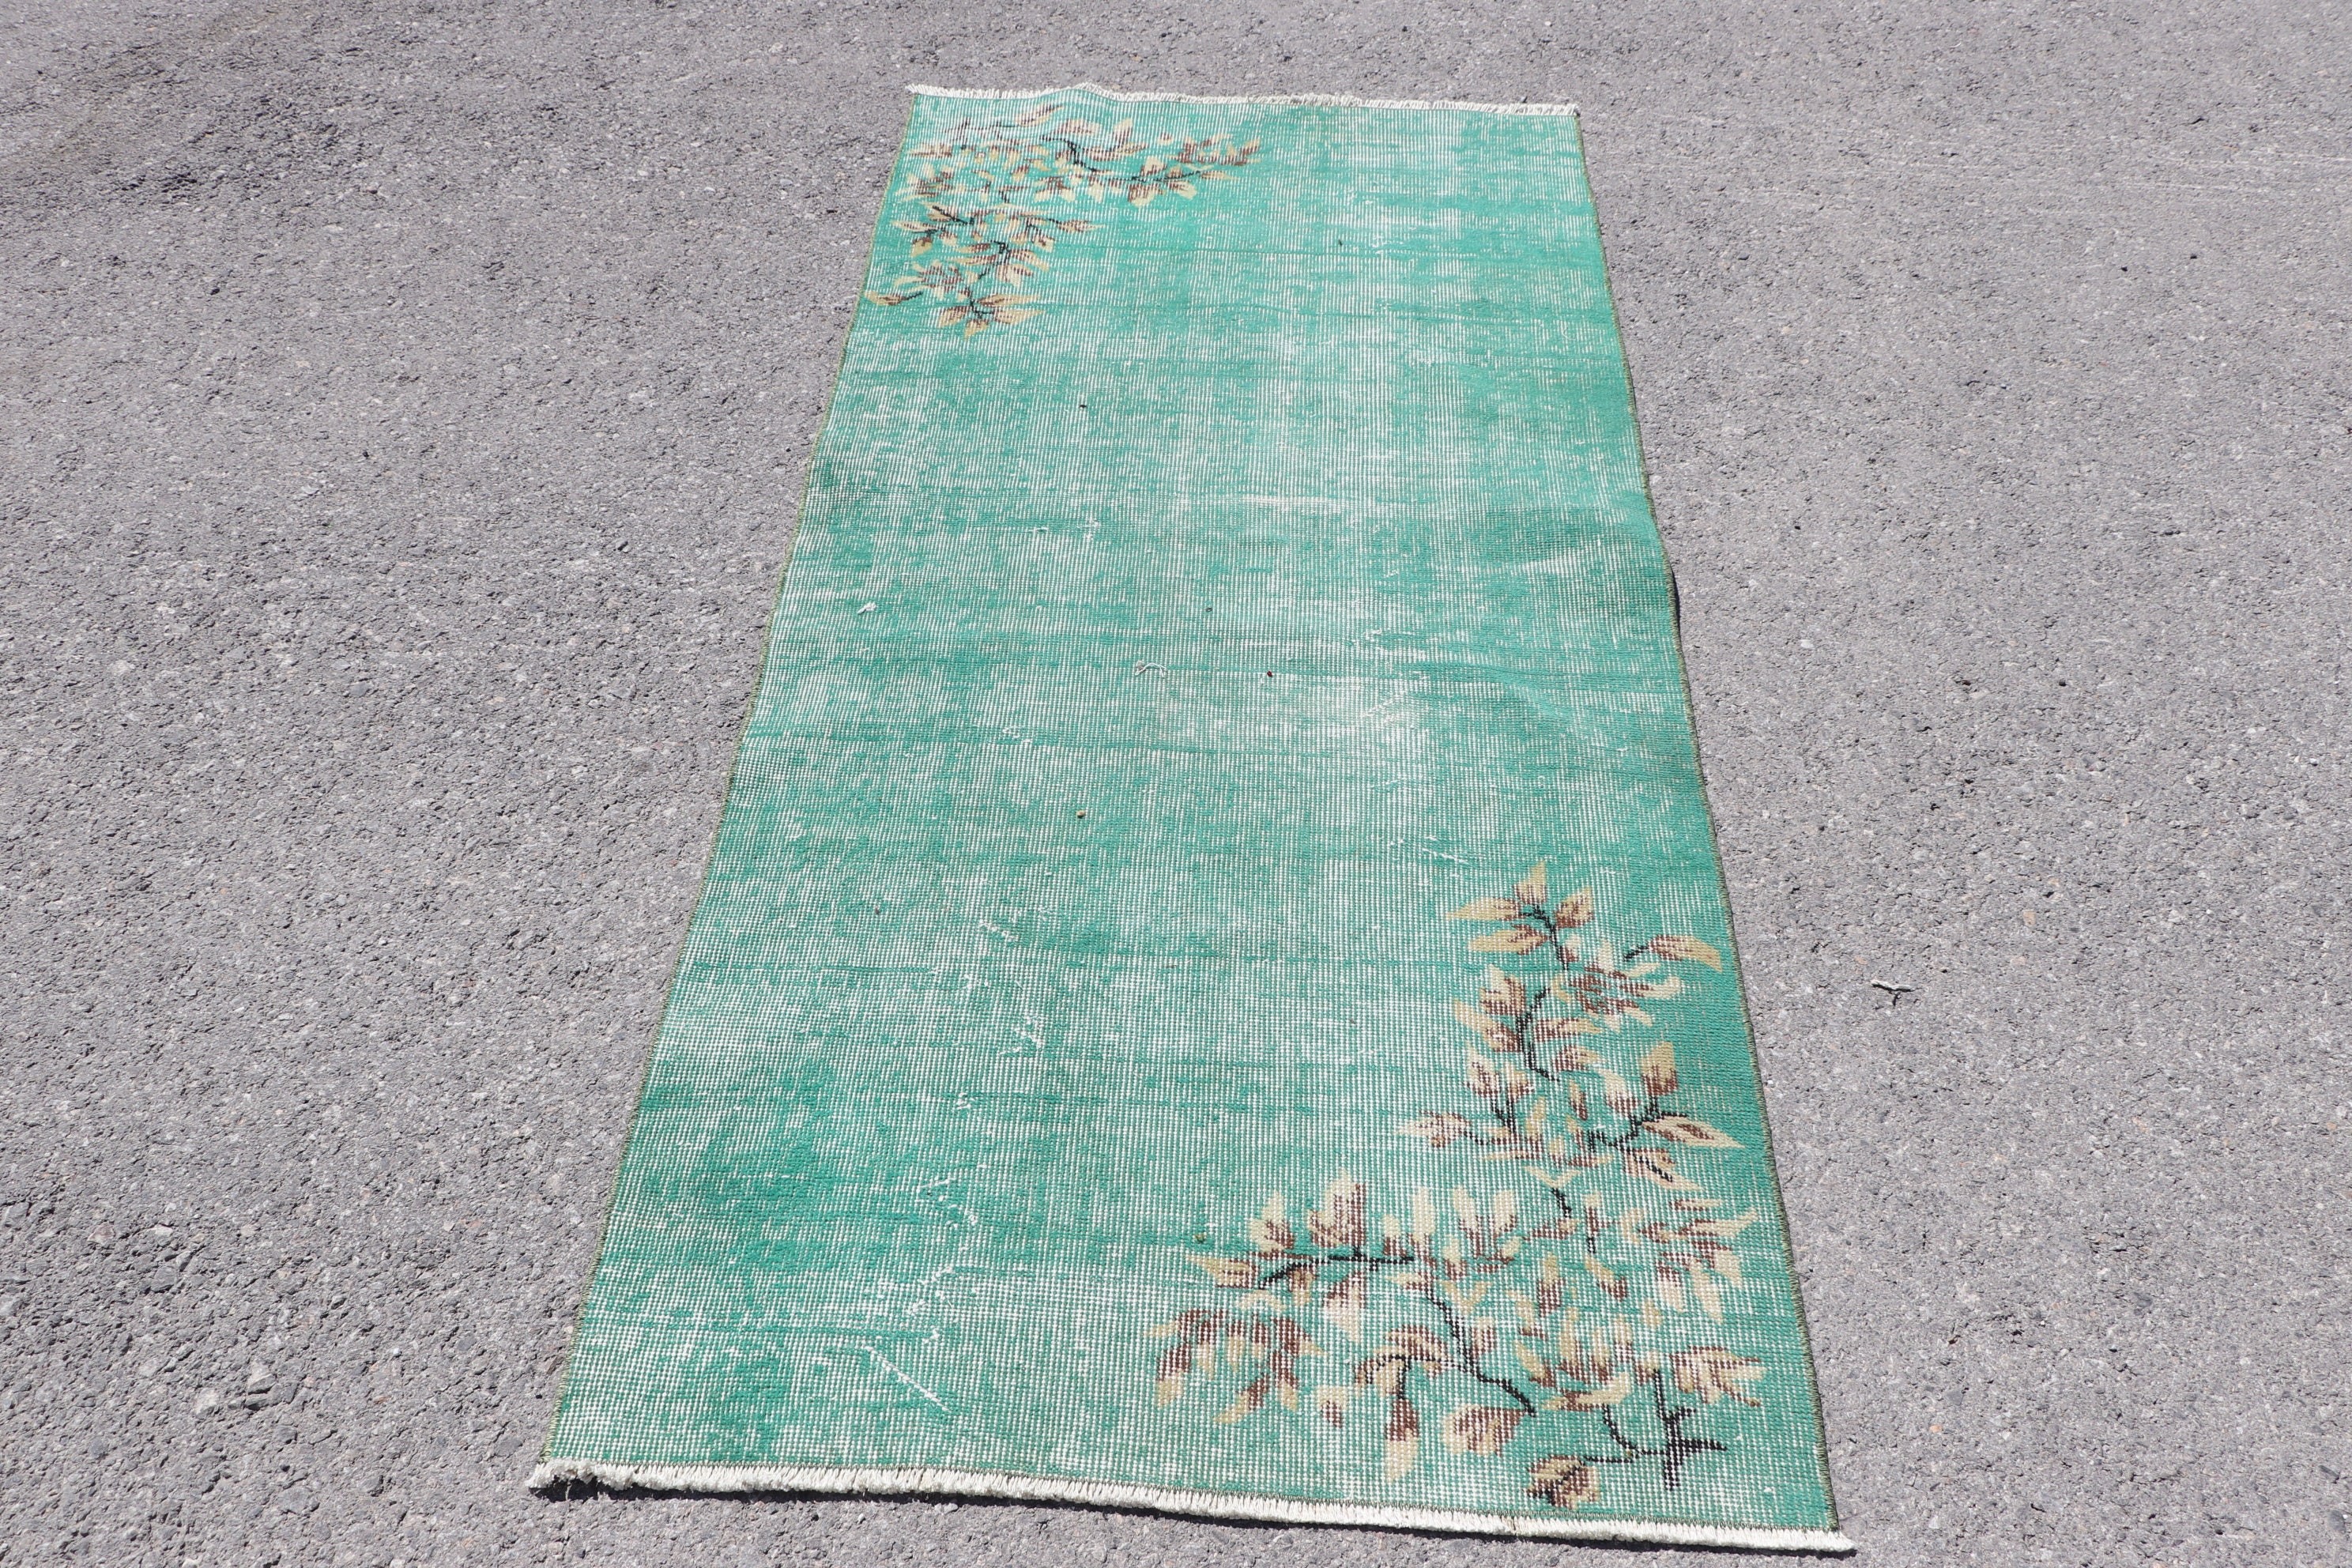 Turkish Rugs, Vintage Rug, Rugs for Bedroom, 3x6.2 ft Accent Rug, Floor Rug, Kitchen Rug, Entry Rugs, Wool Rugs, Green Anatolian Rug